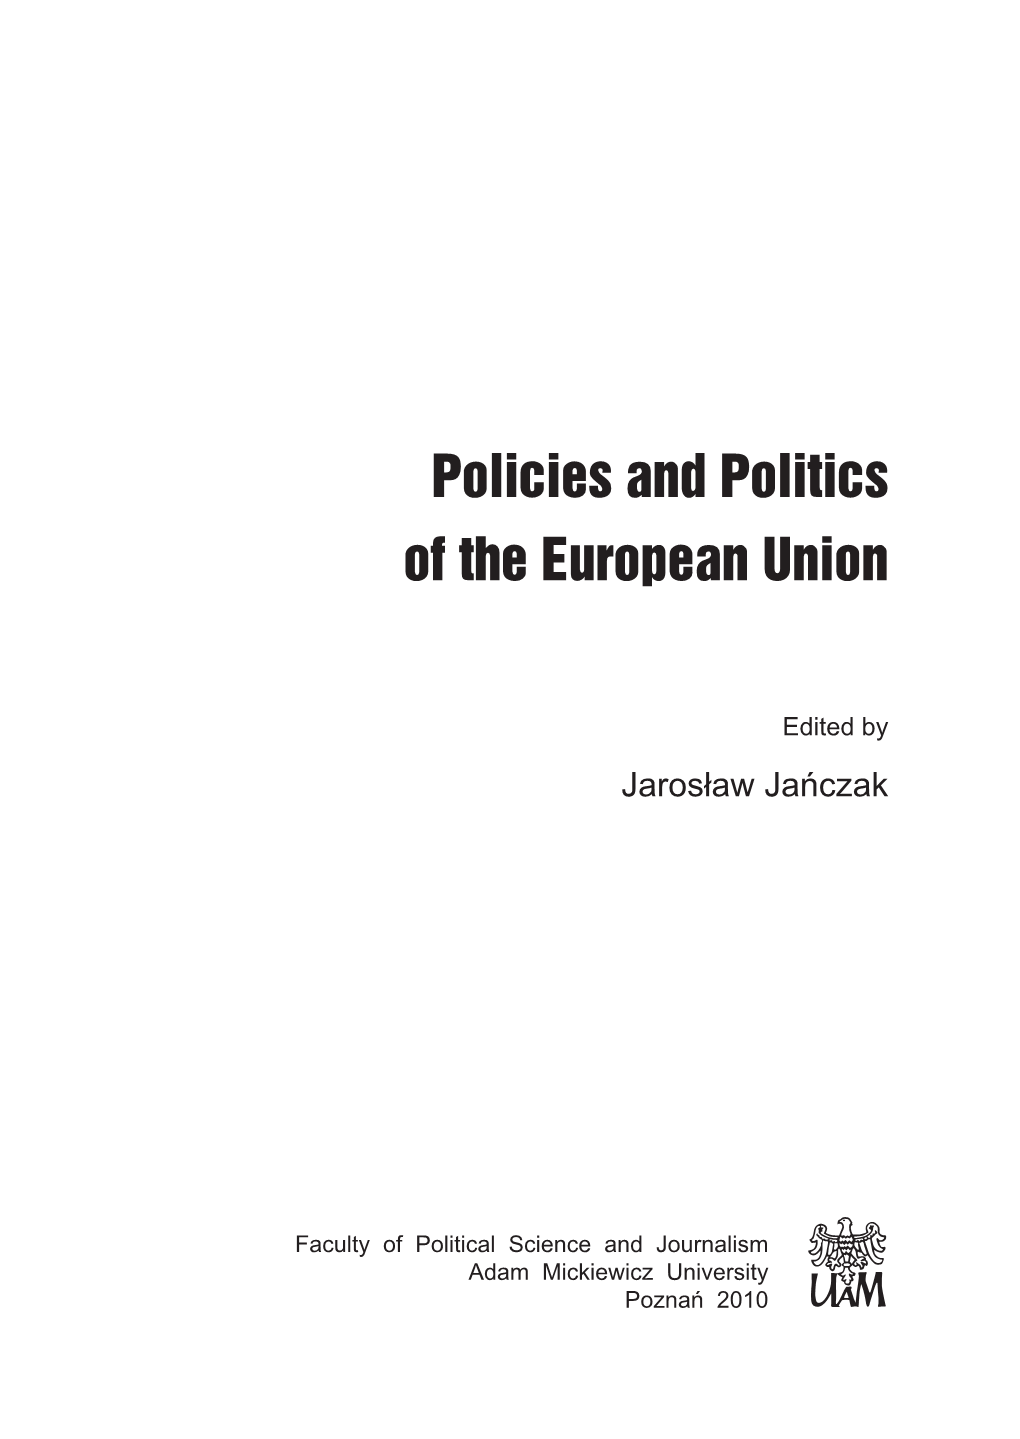 Policies and Politics of the European Union